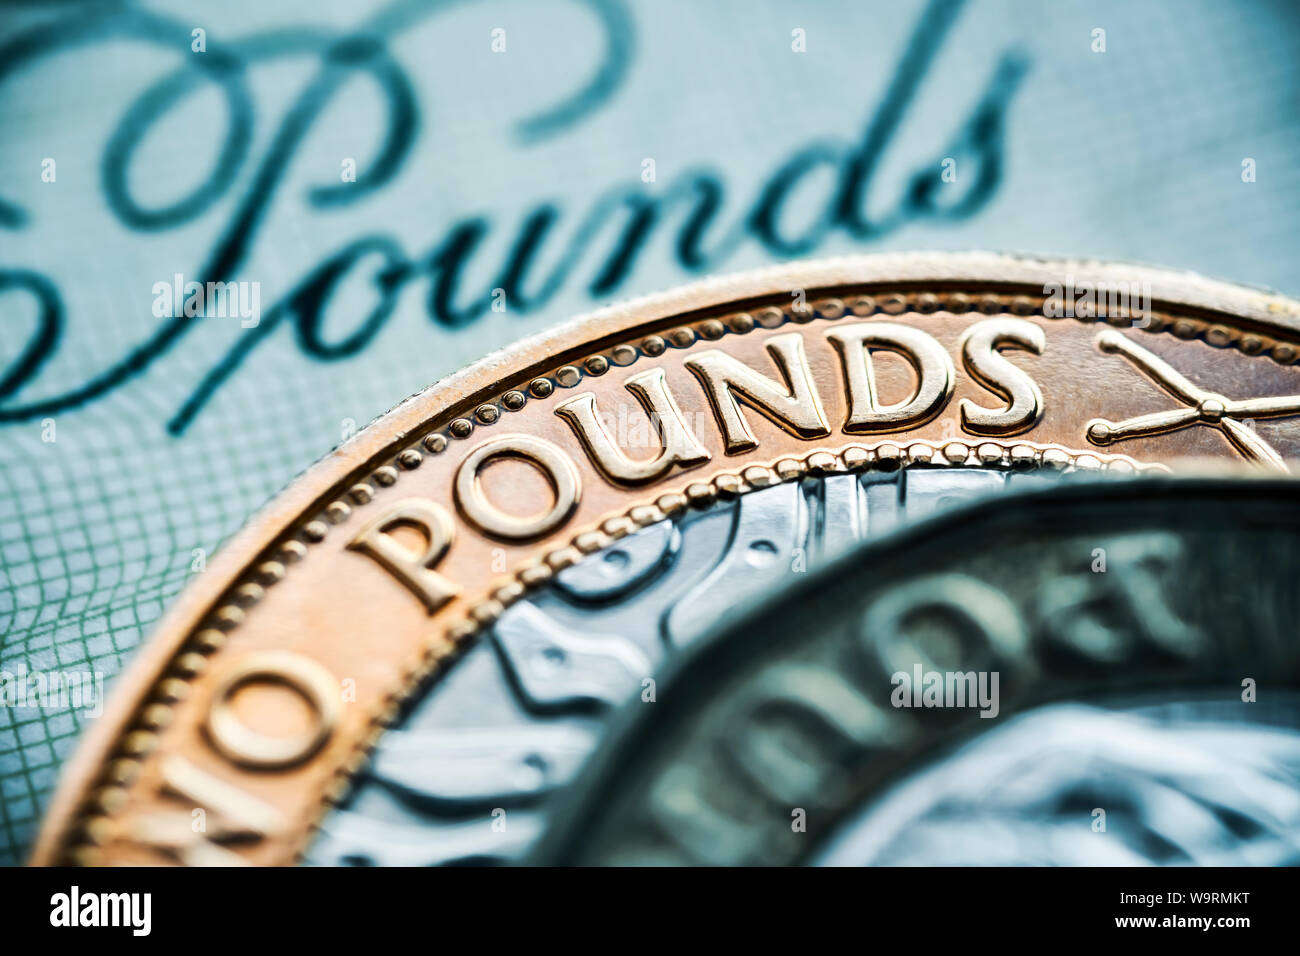 British pound sterling coins and banknote Stock Photo